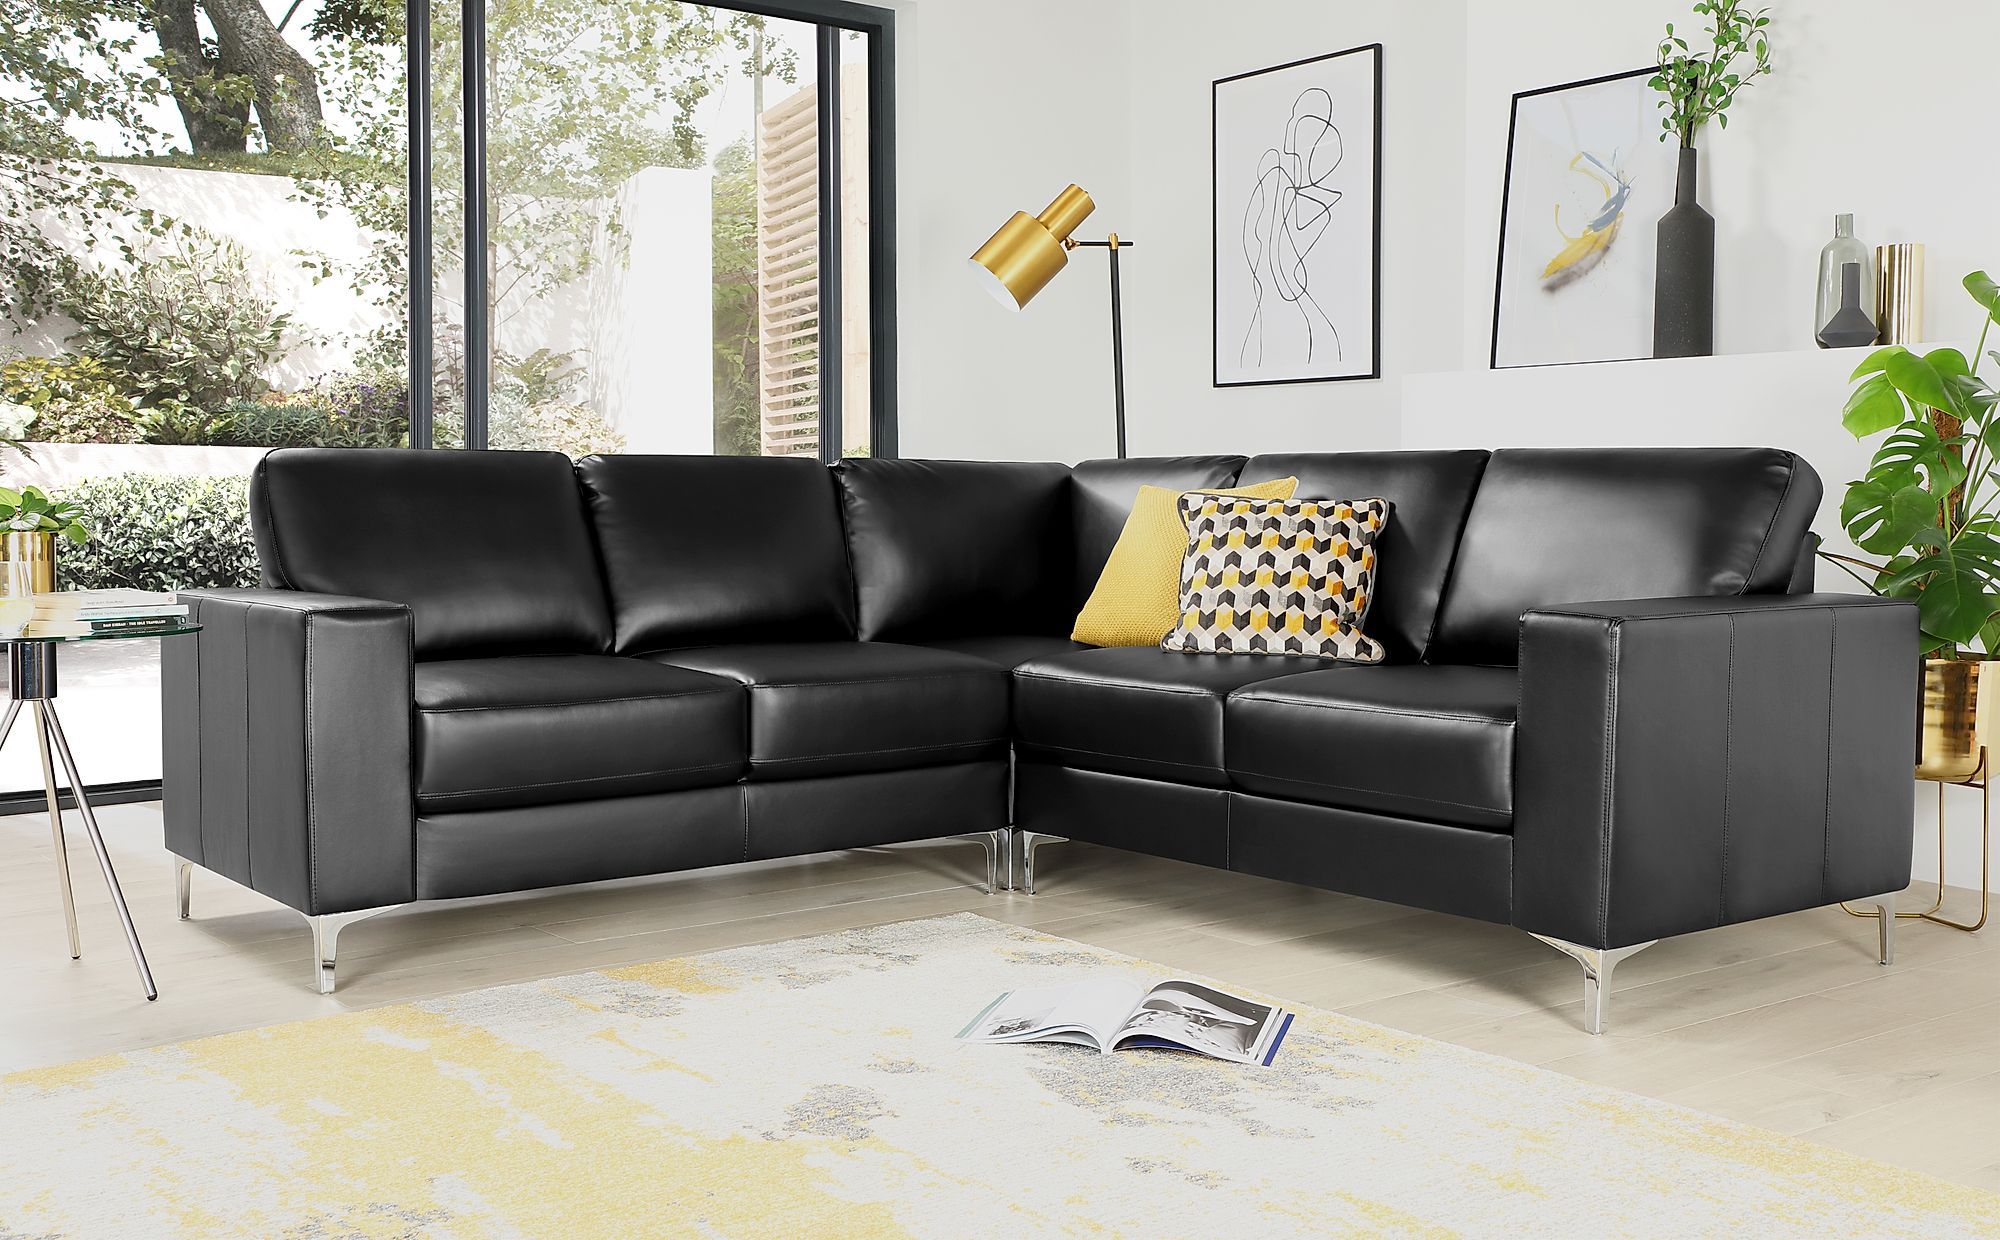 Baltimore Black Leather Corner Sofa | Furniture Choice For Sofas In Black (Gallery 16 of 20)